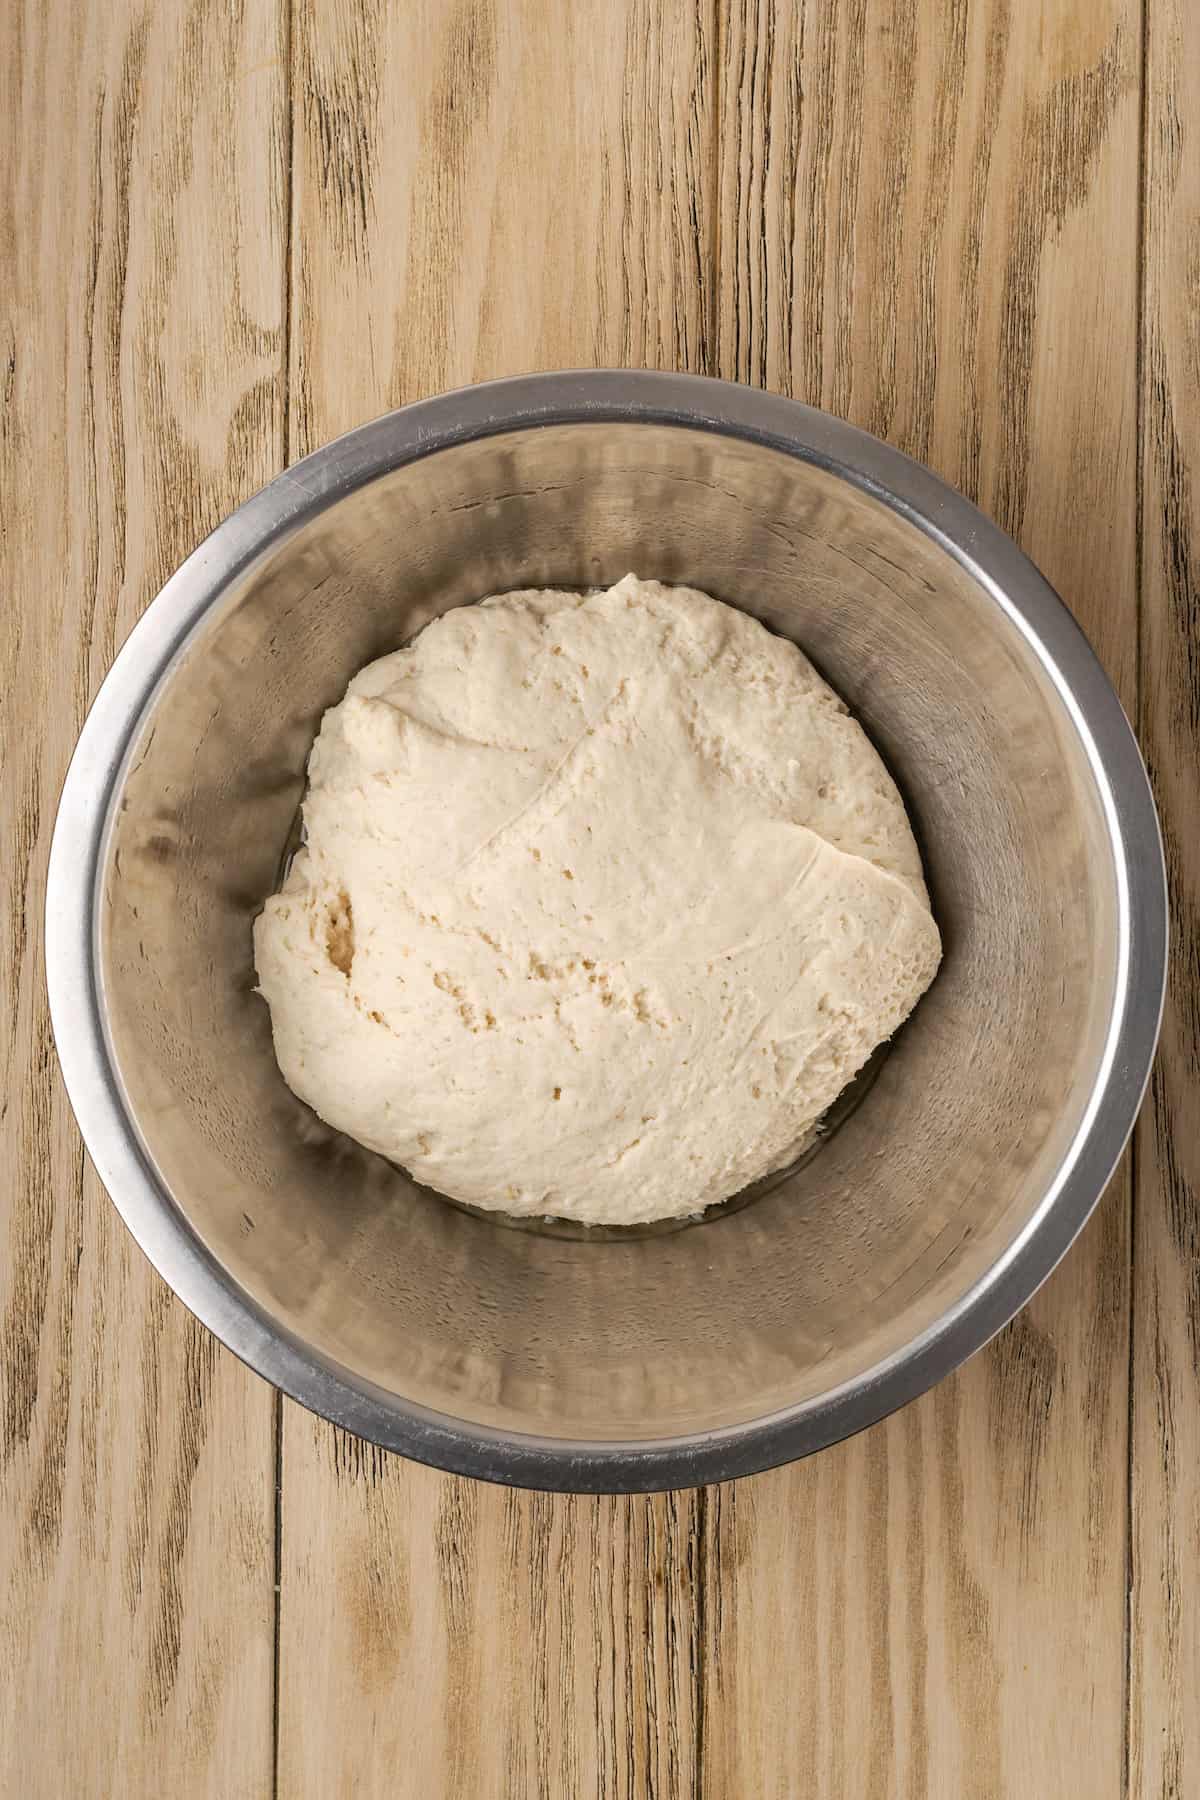 A ball of gluten-free garlic knot dough after it has risen in a metal mixing bowl.